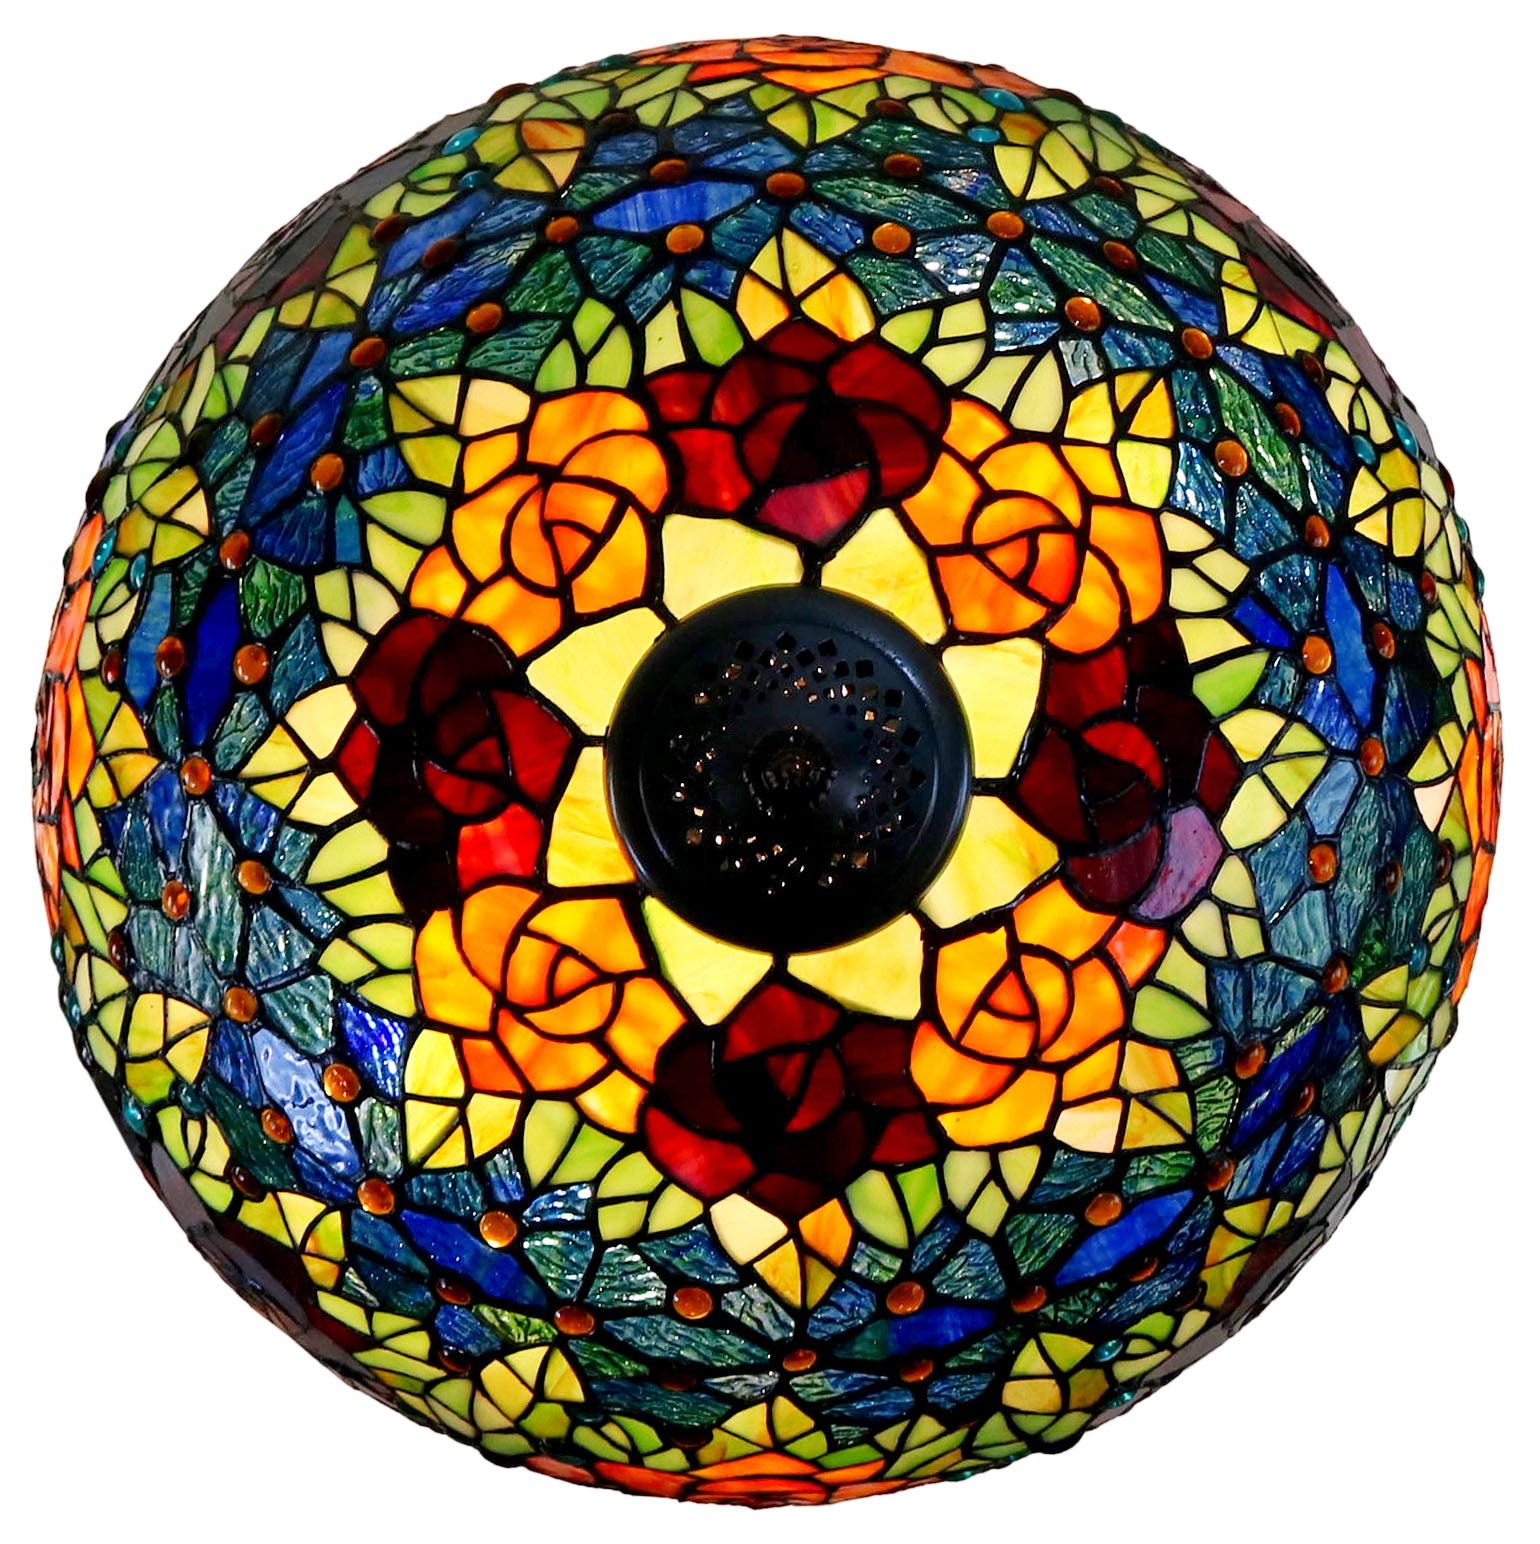 Gorgeous 18 inches wide "Garden Of Roses" Stained Glass Tiffany Floor Lamp